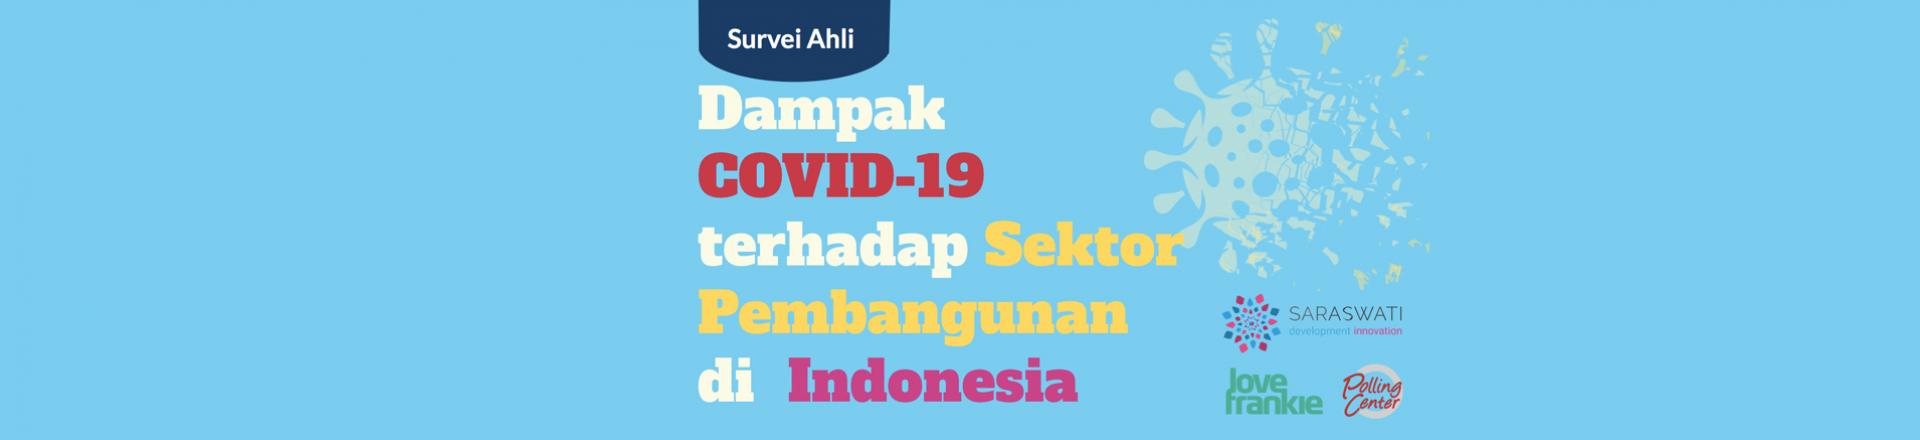 Expert Survey: The Impact of COVID-19 on the Development Sector in Indonesia